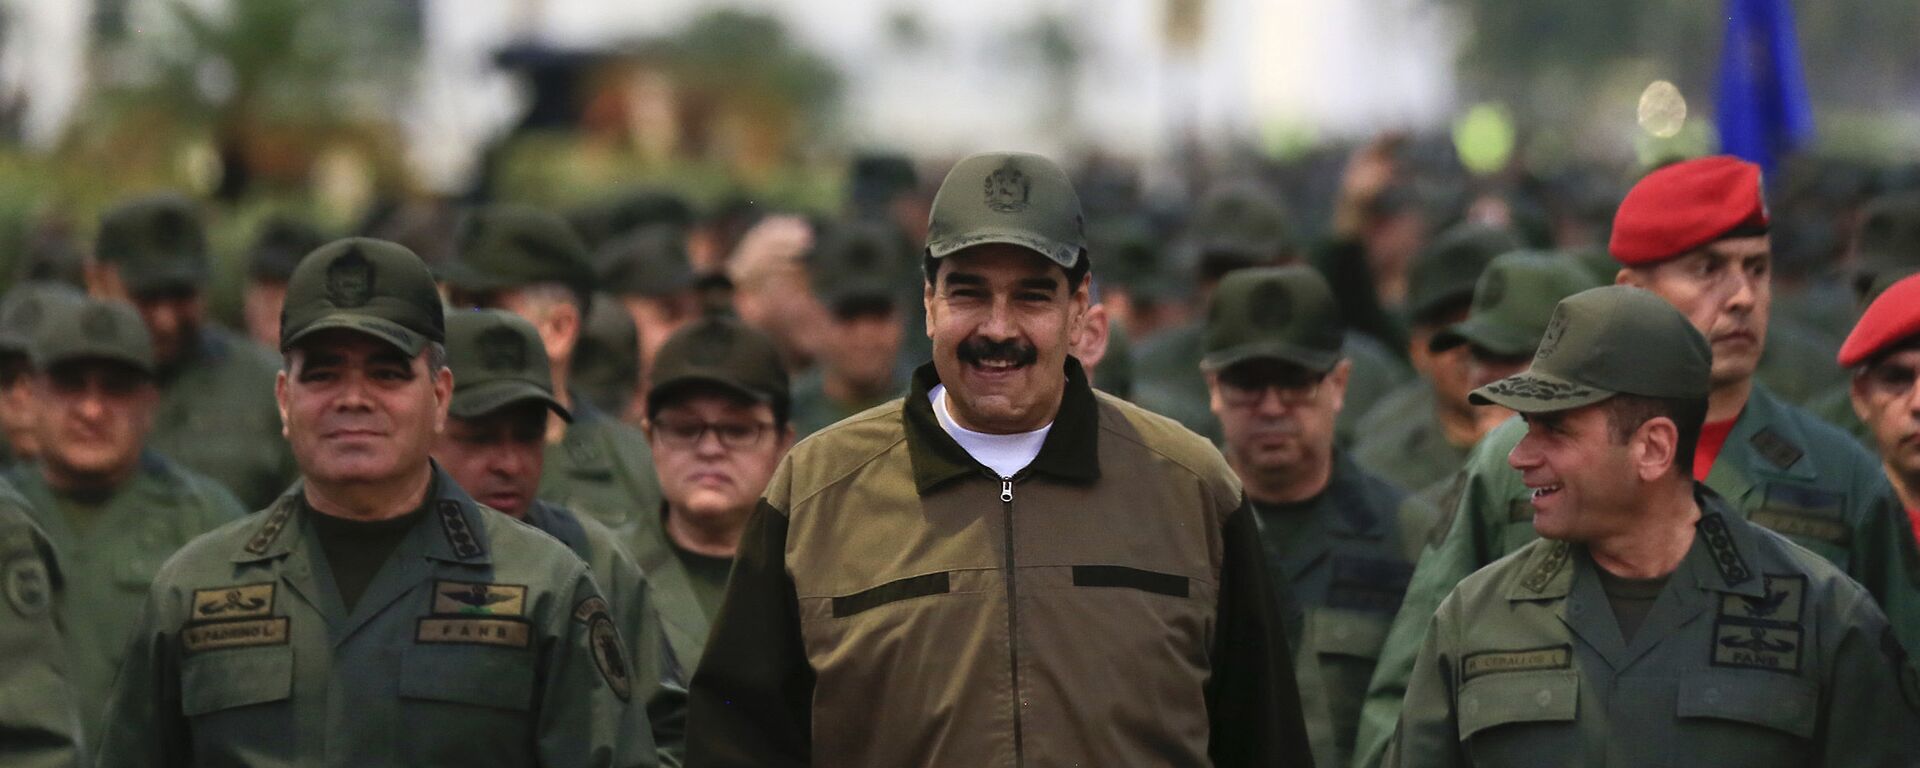 In this handout photo released by Miraflores Press Office, Venezuela's President Nicolas Maduro, center, accompanied by Defense Minister Gen. Vladimir Padrino Lopez, left, and the Strategies Operations Commander, Adm. Remigio Ceballos, arrive for a meeting with the troops at Fort Tiuna in Caracas, Venezuela, Thursday, May 2, 2019 - Sputnik International, 1920, 16.08.2023